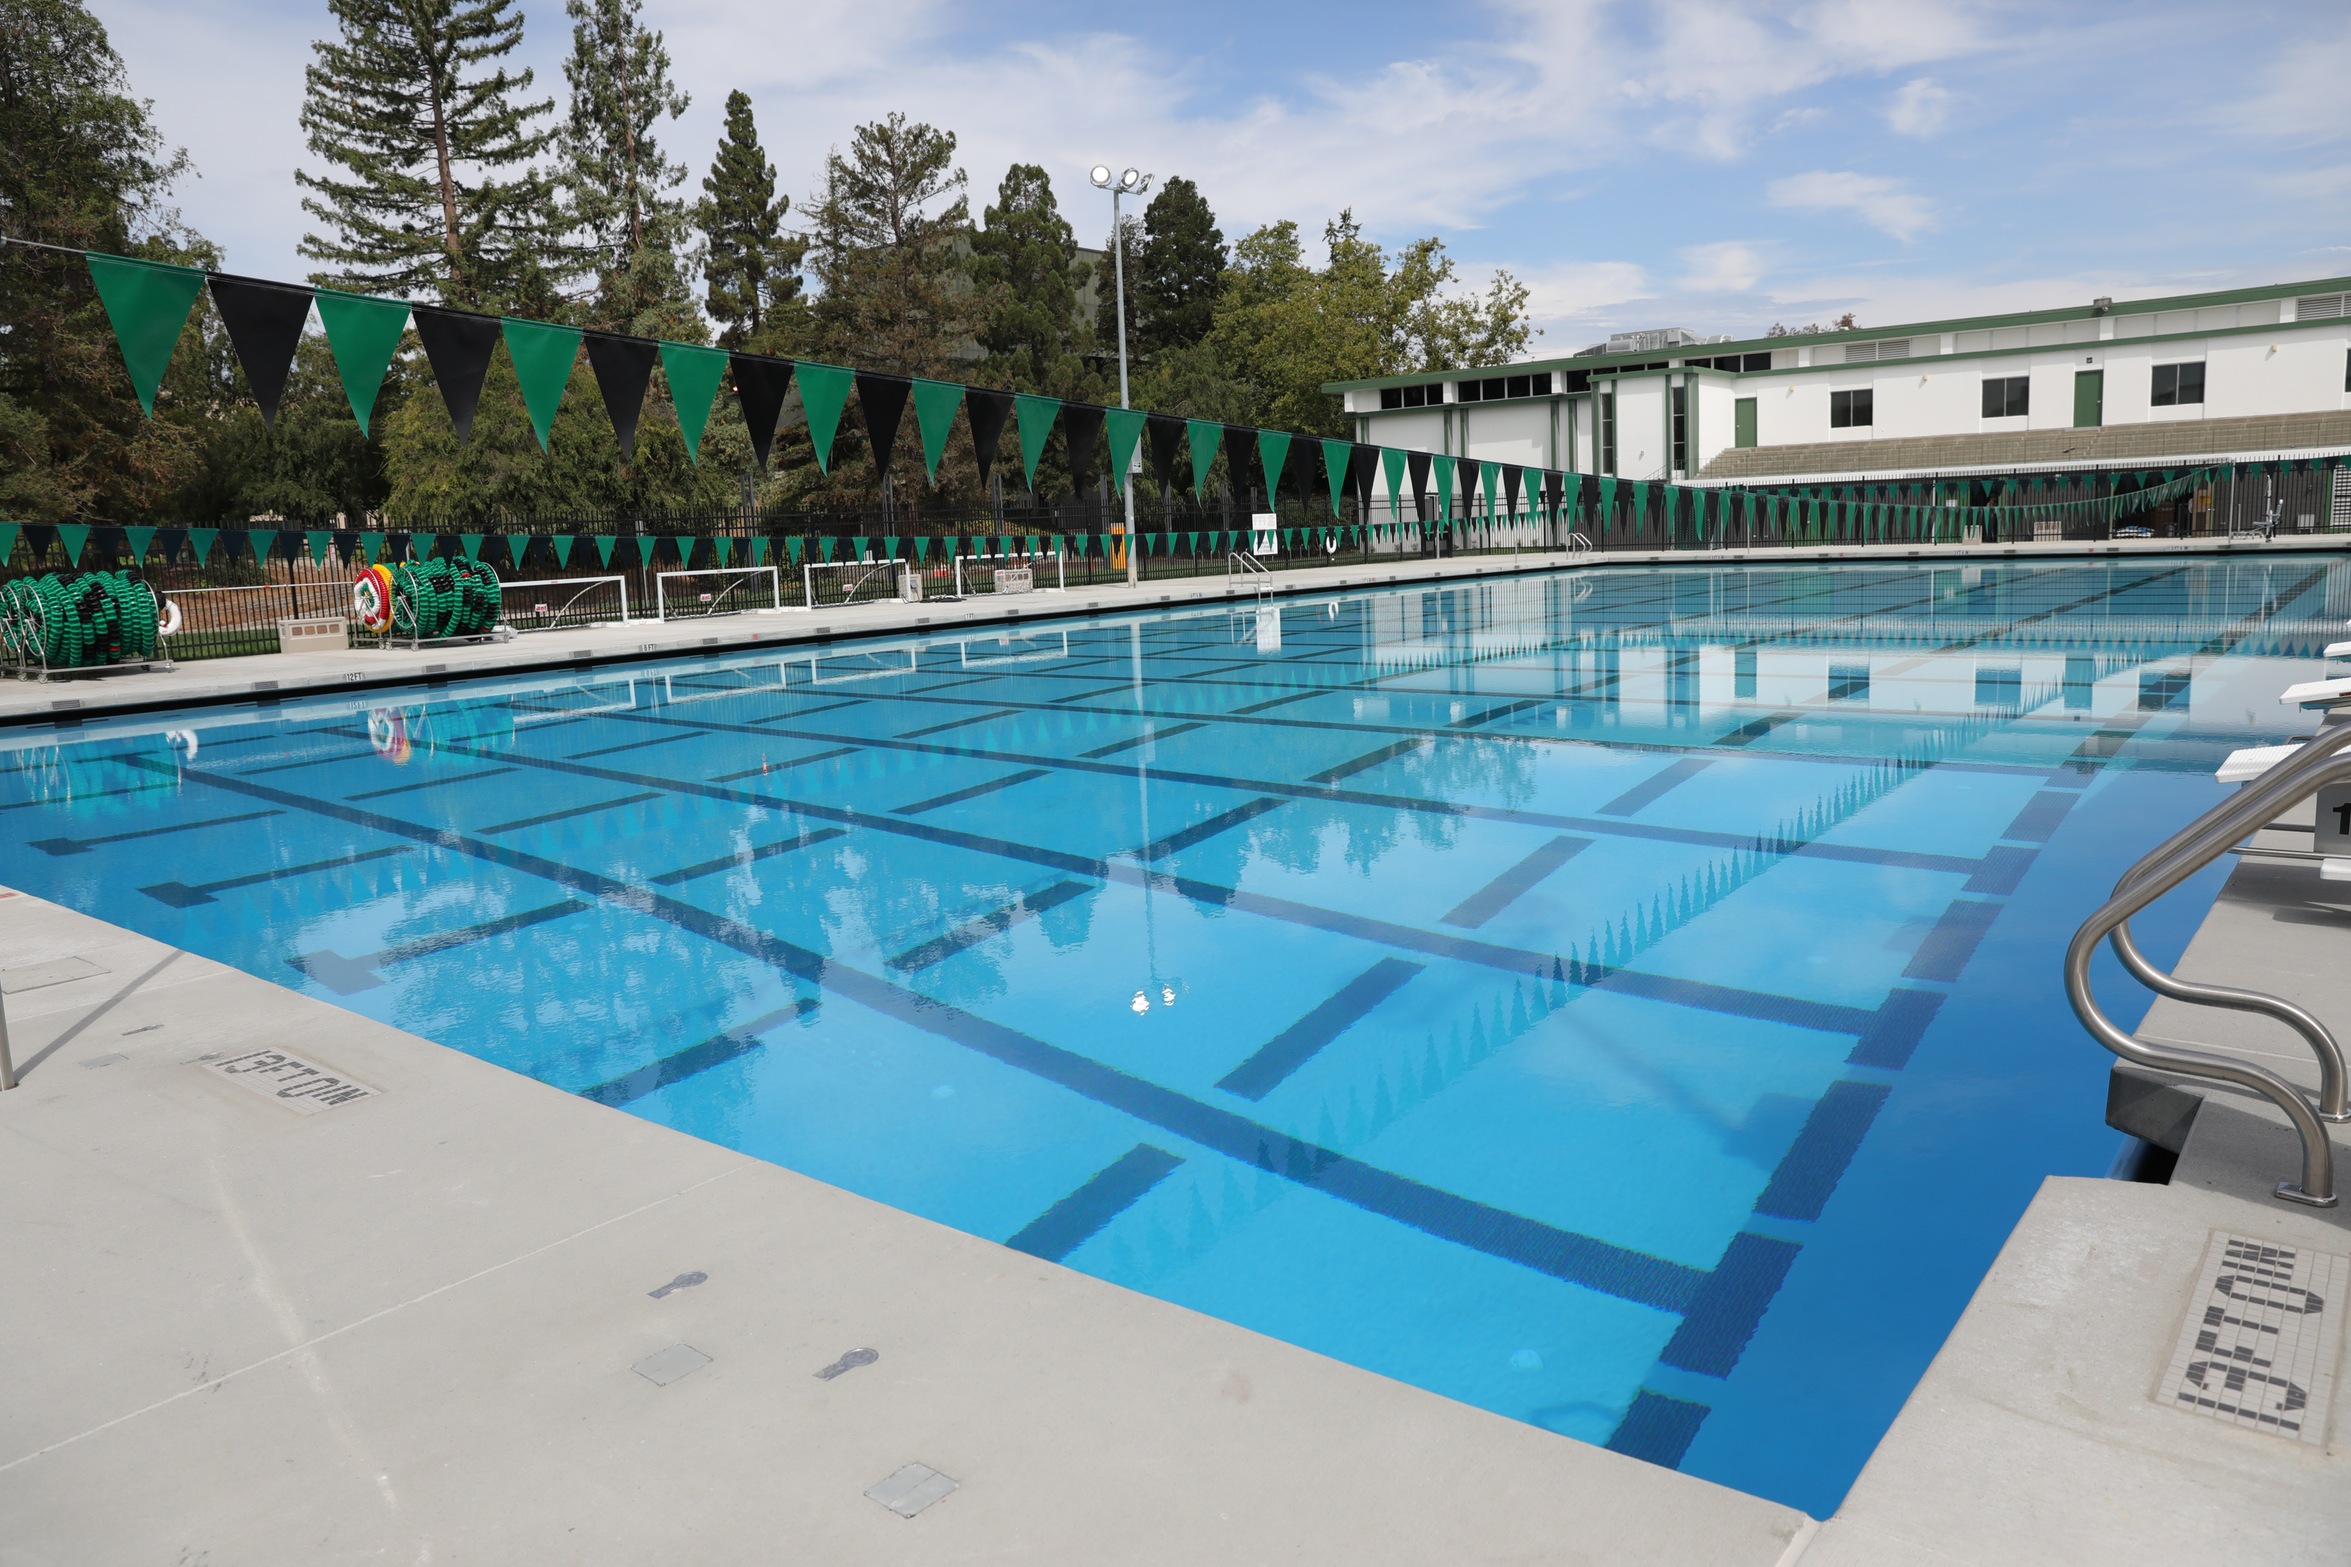 DVC Aquatics Center opens after 2 years of new builds & renovations